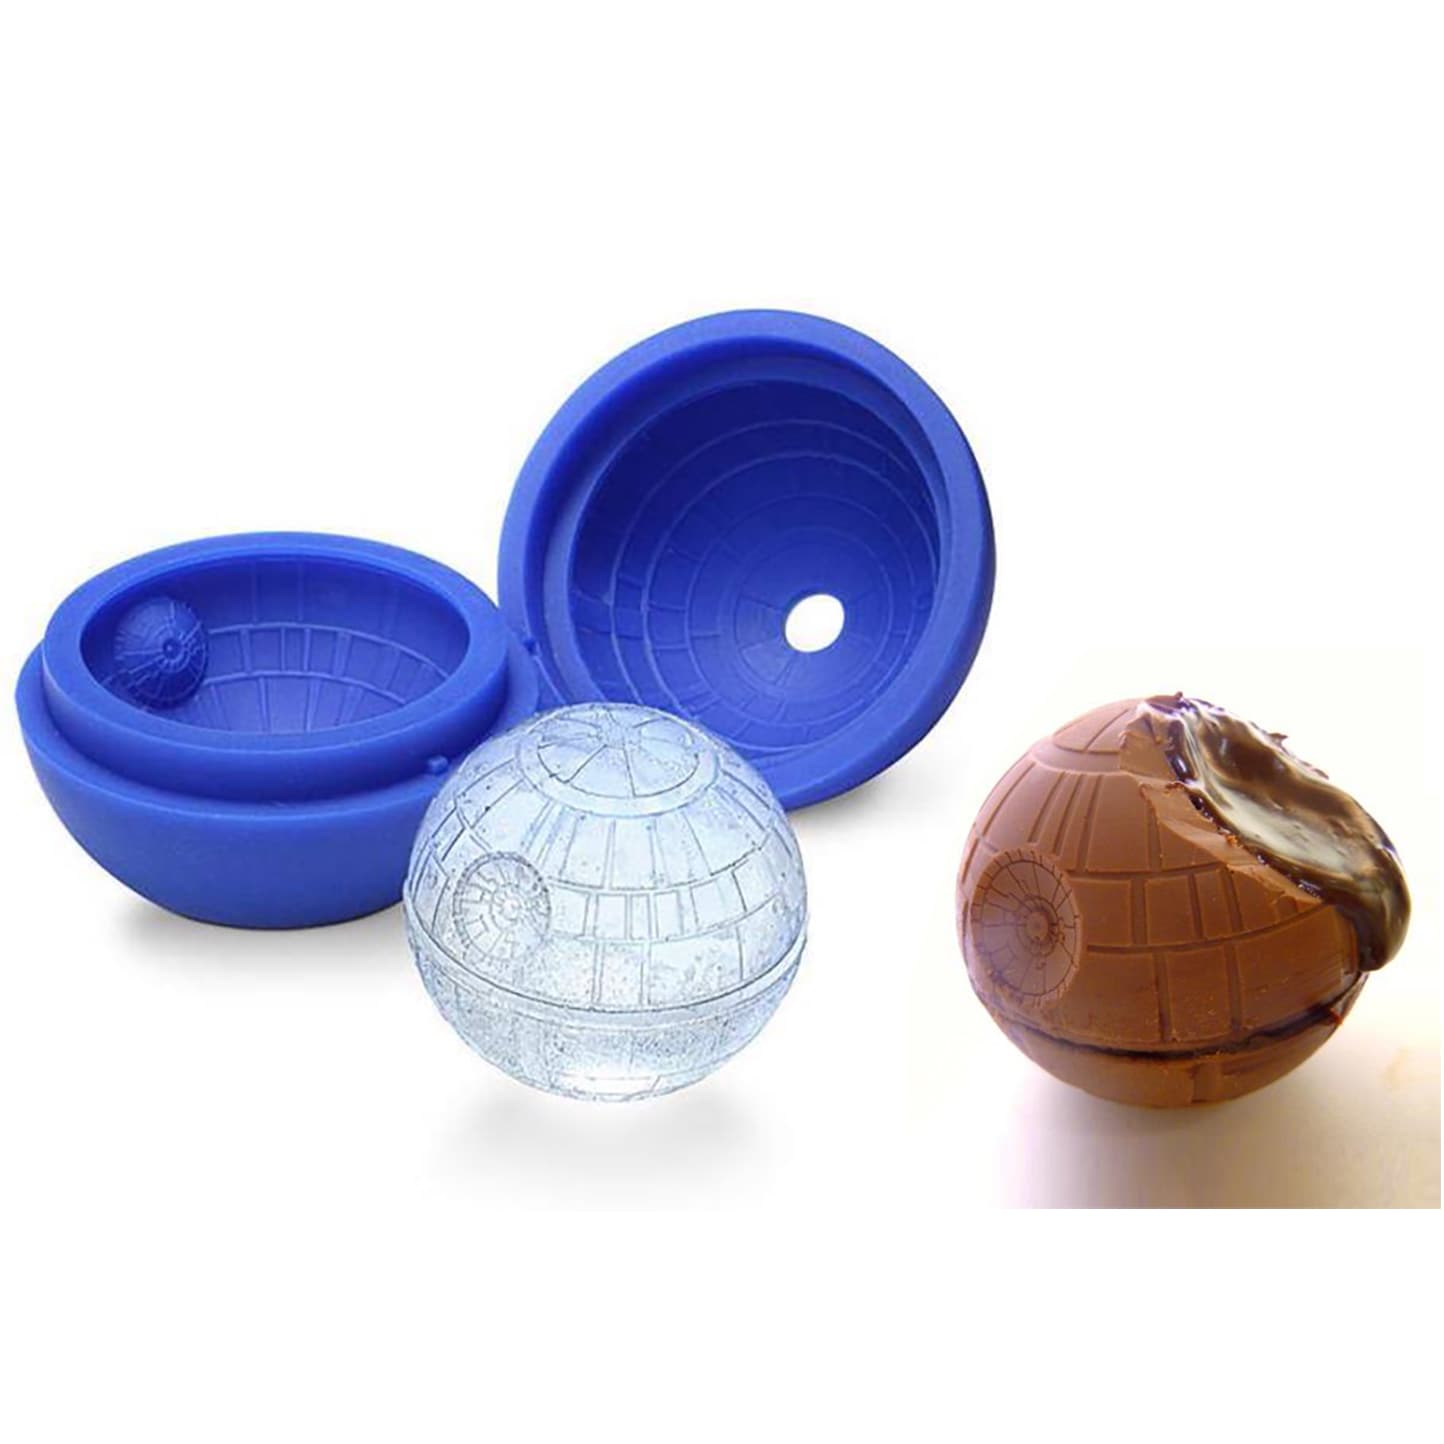 https://ak1.ostkcdn.com/images/products/27105415/4pc-Star-Wars-Silicone-Ice-Tray-and-Chocolate-Mold-Galactic-Empire-43ec108f-9790-443e-84a2-ad9d09764e17.jpg